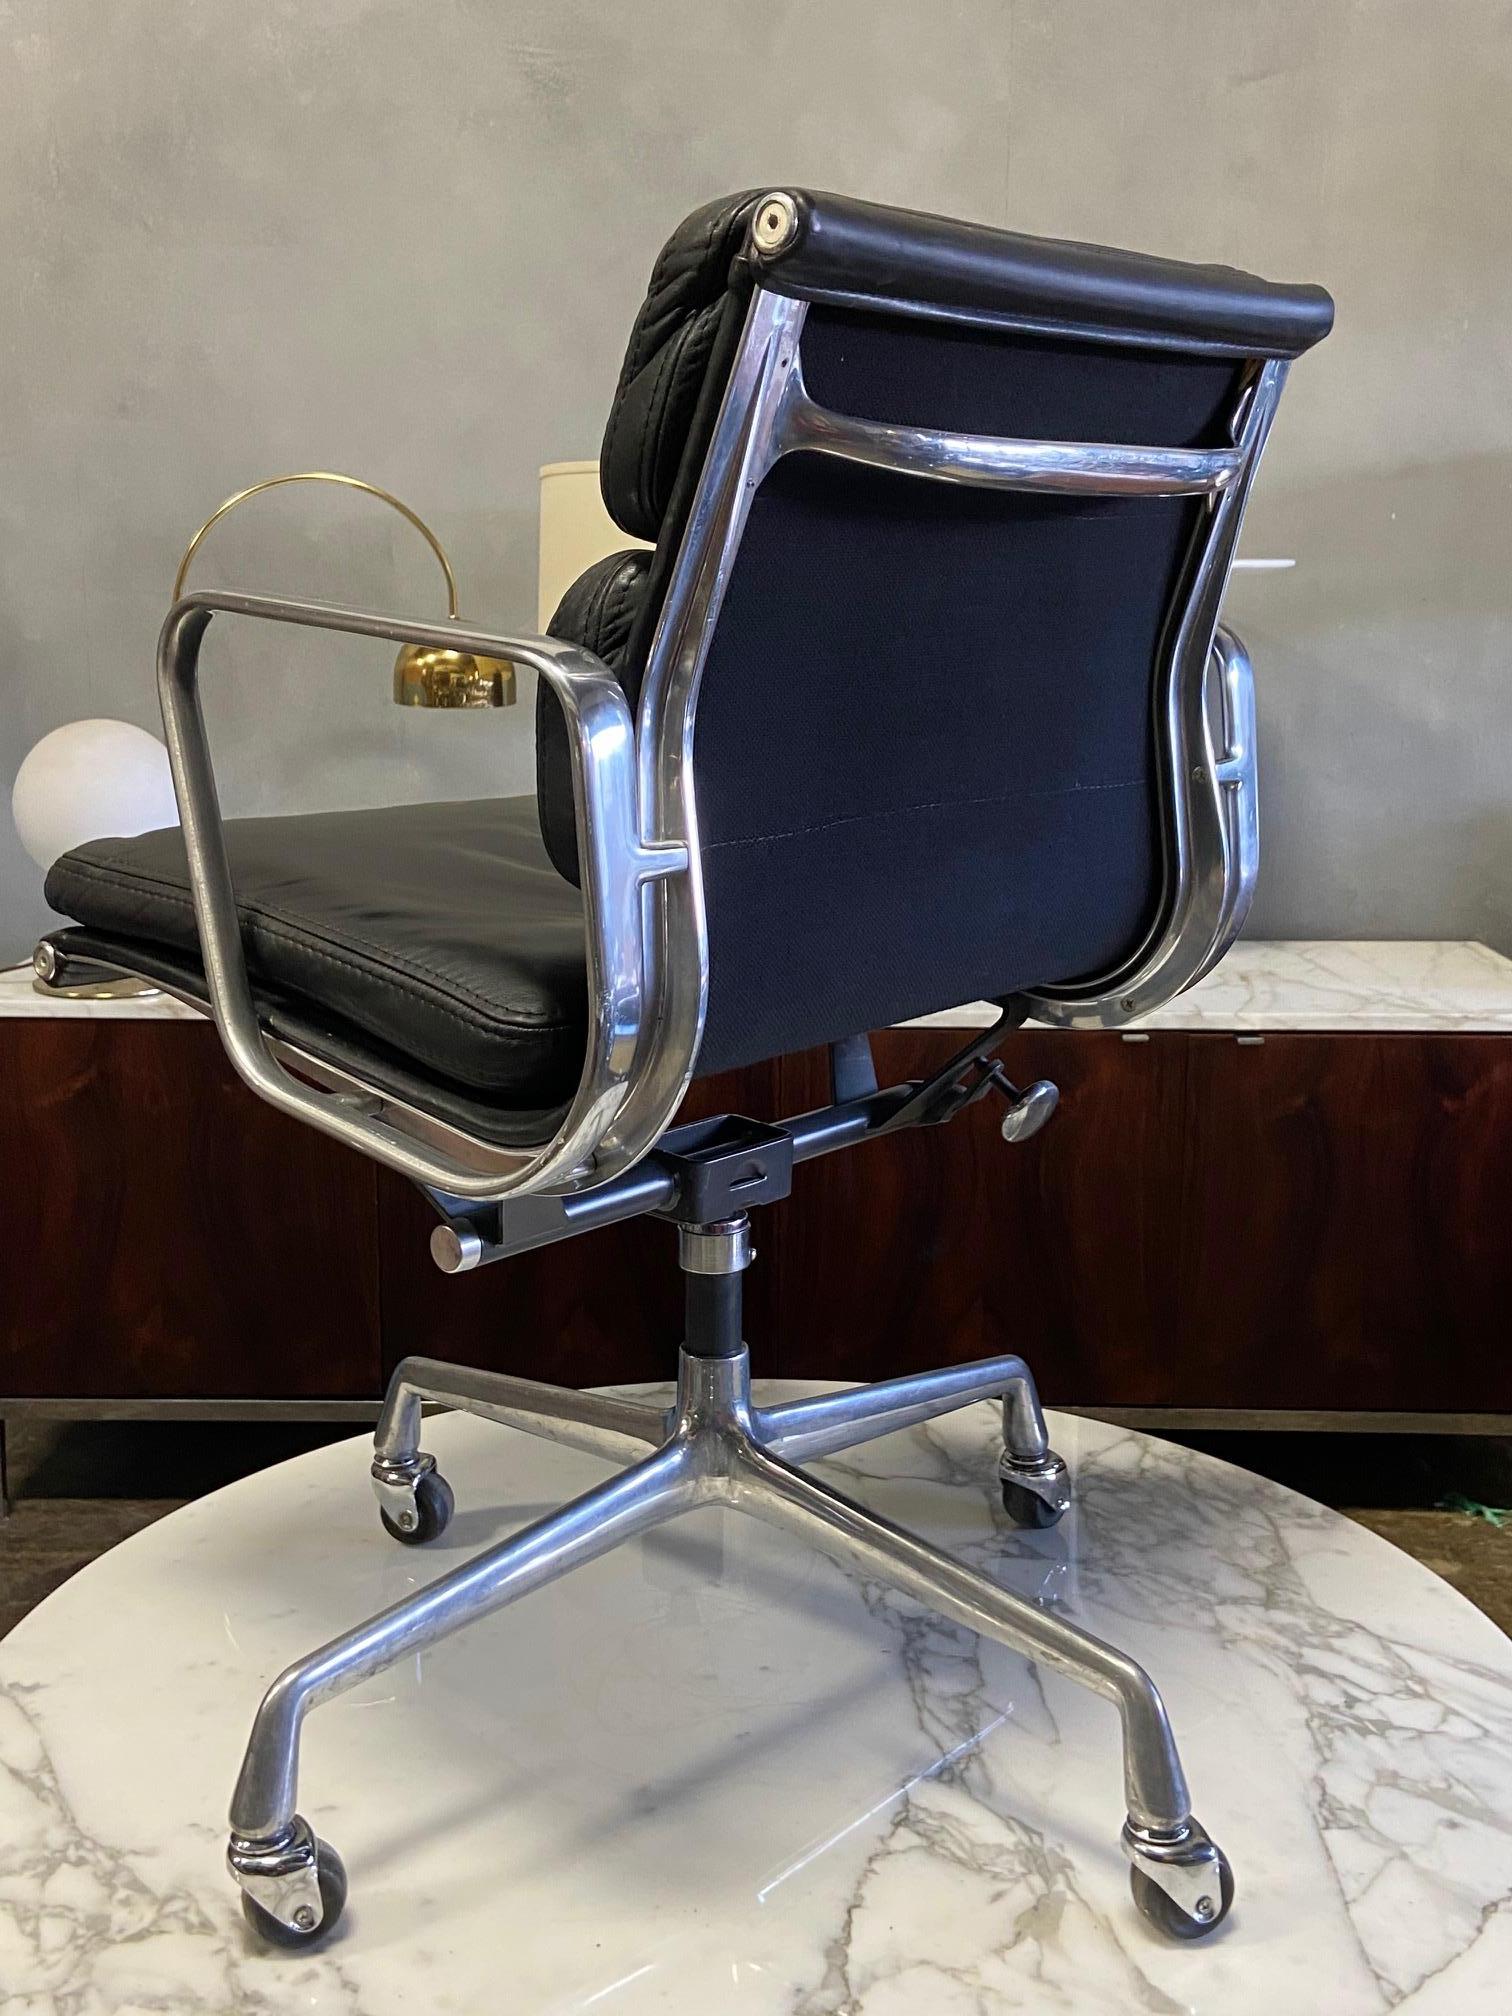 Midcentury Soft Pad Chair by Eames for Herman Miller 1